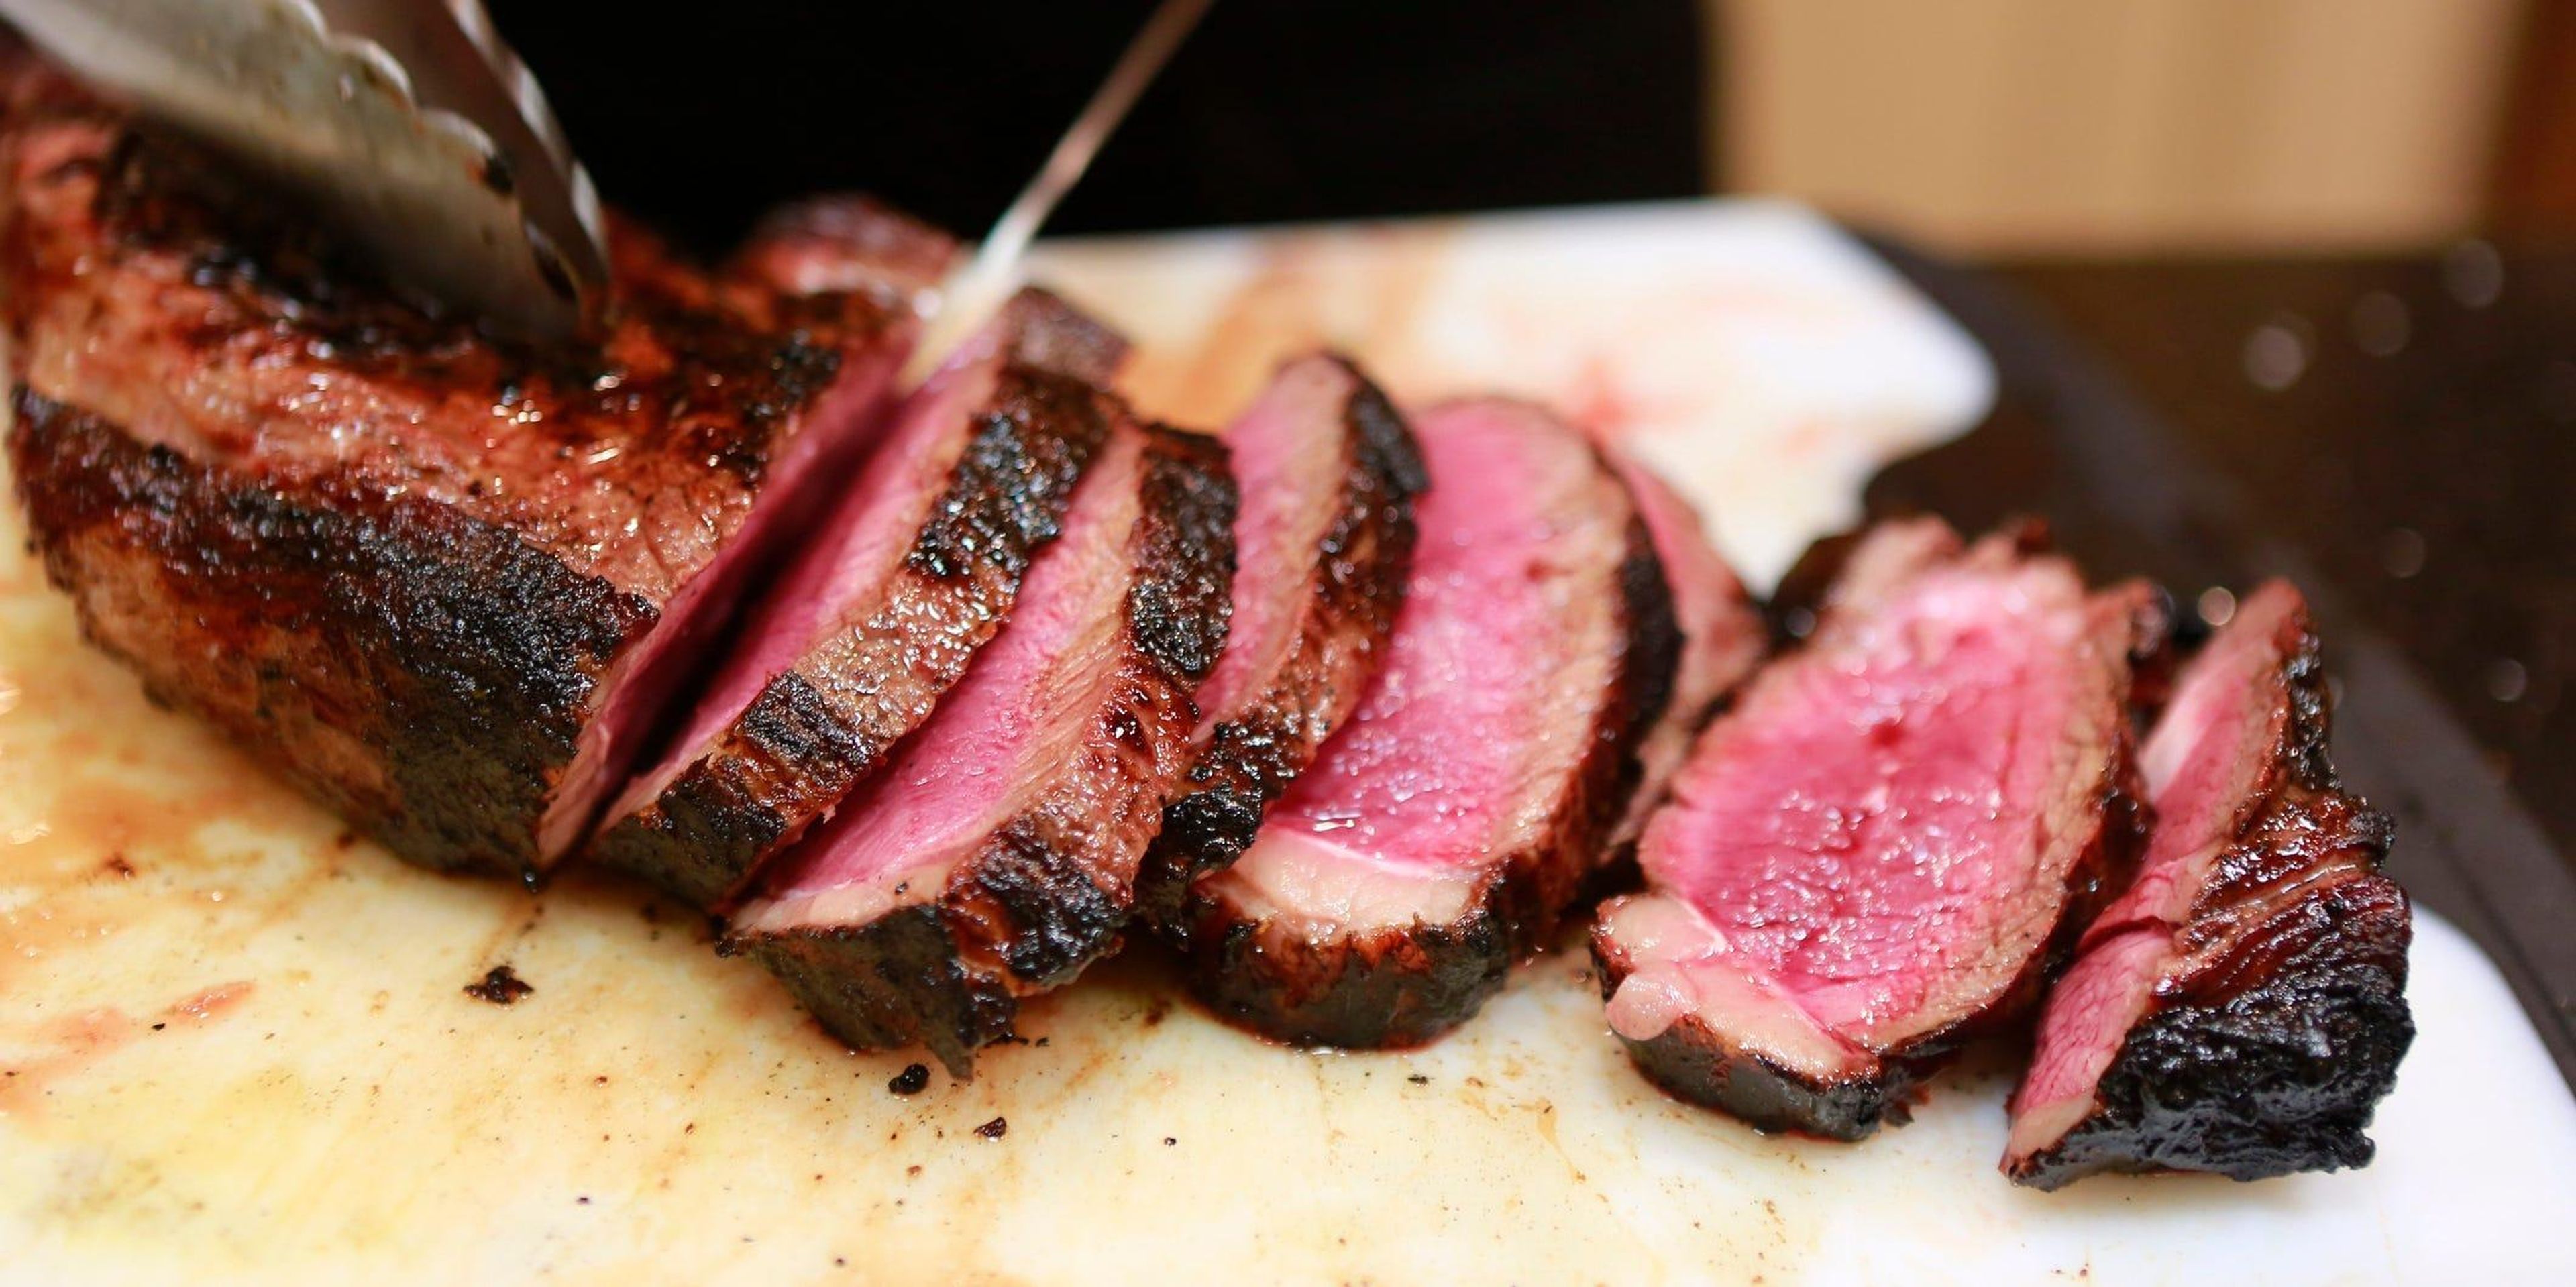 Although red meat is rich in iron, it's also high in saturated fat.